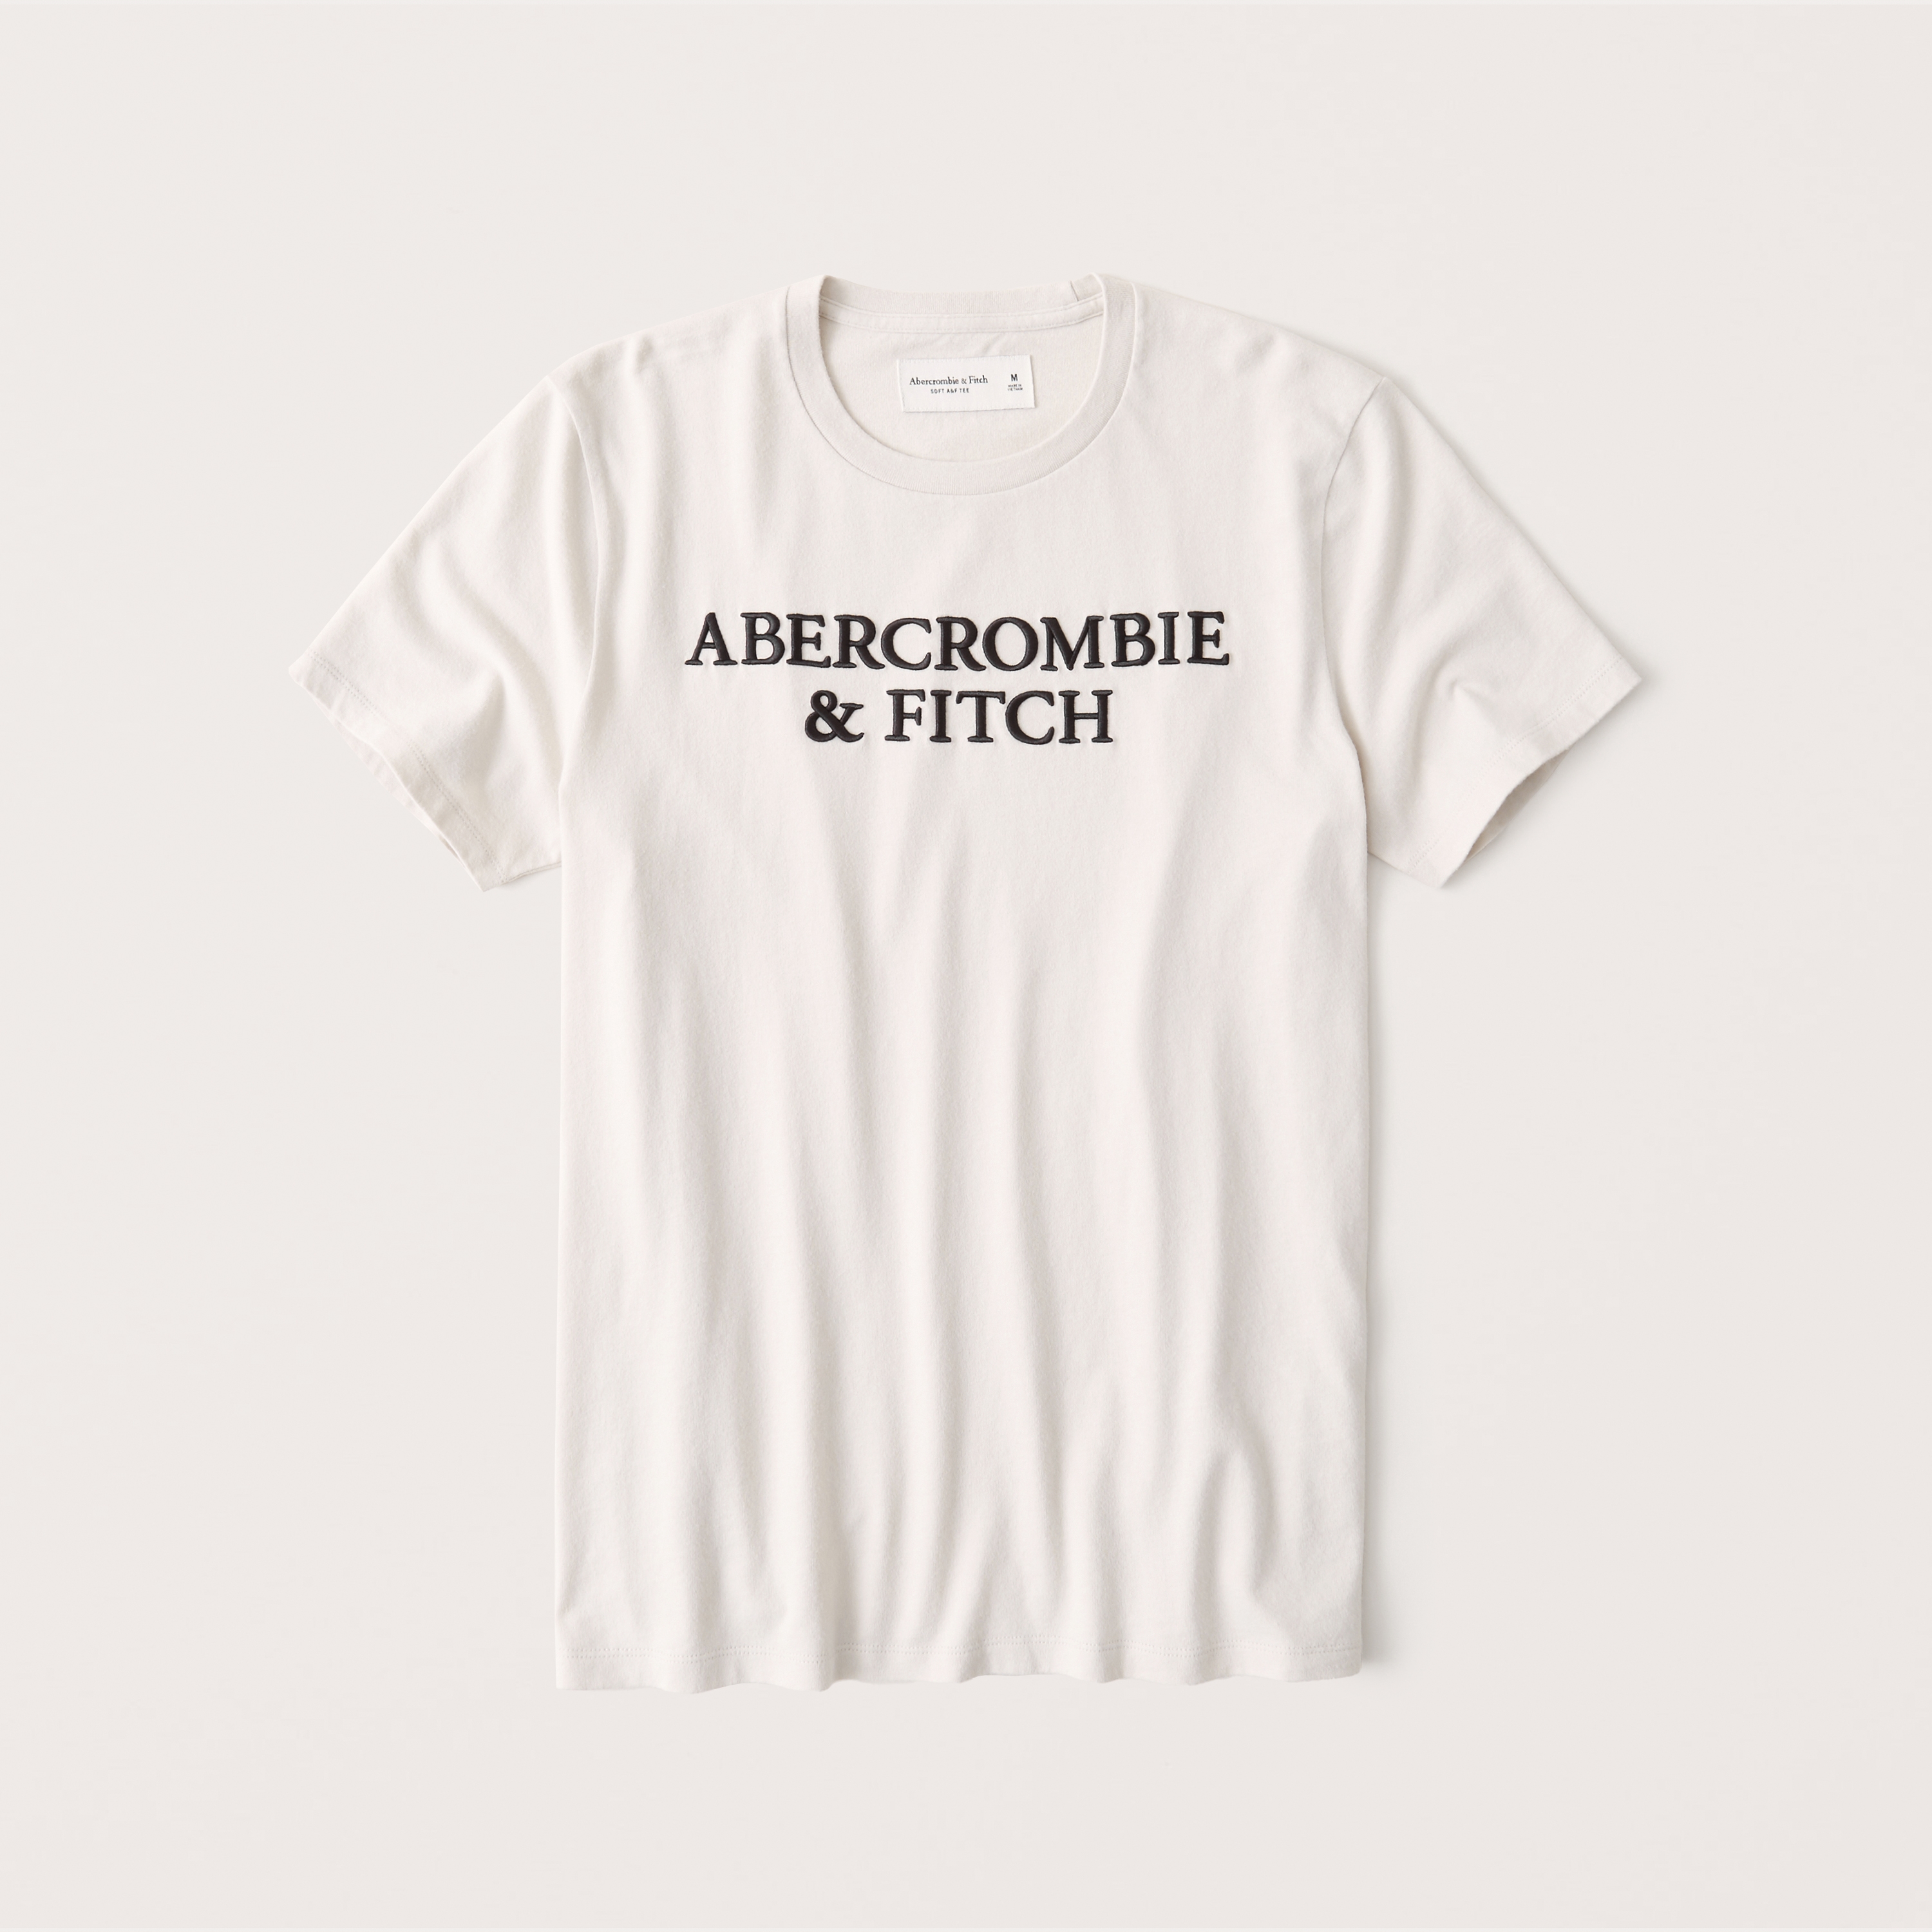 abercrombie fitch t shirts